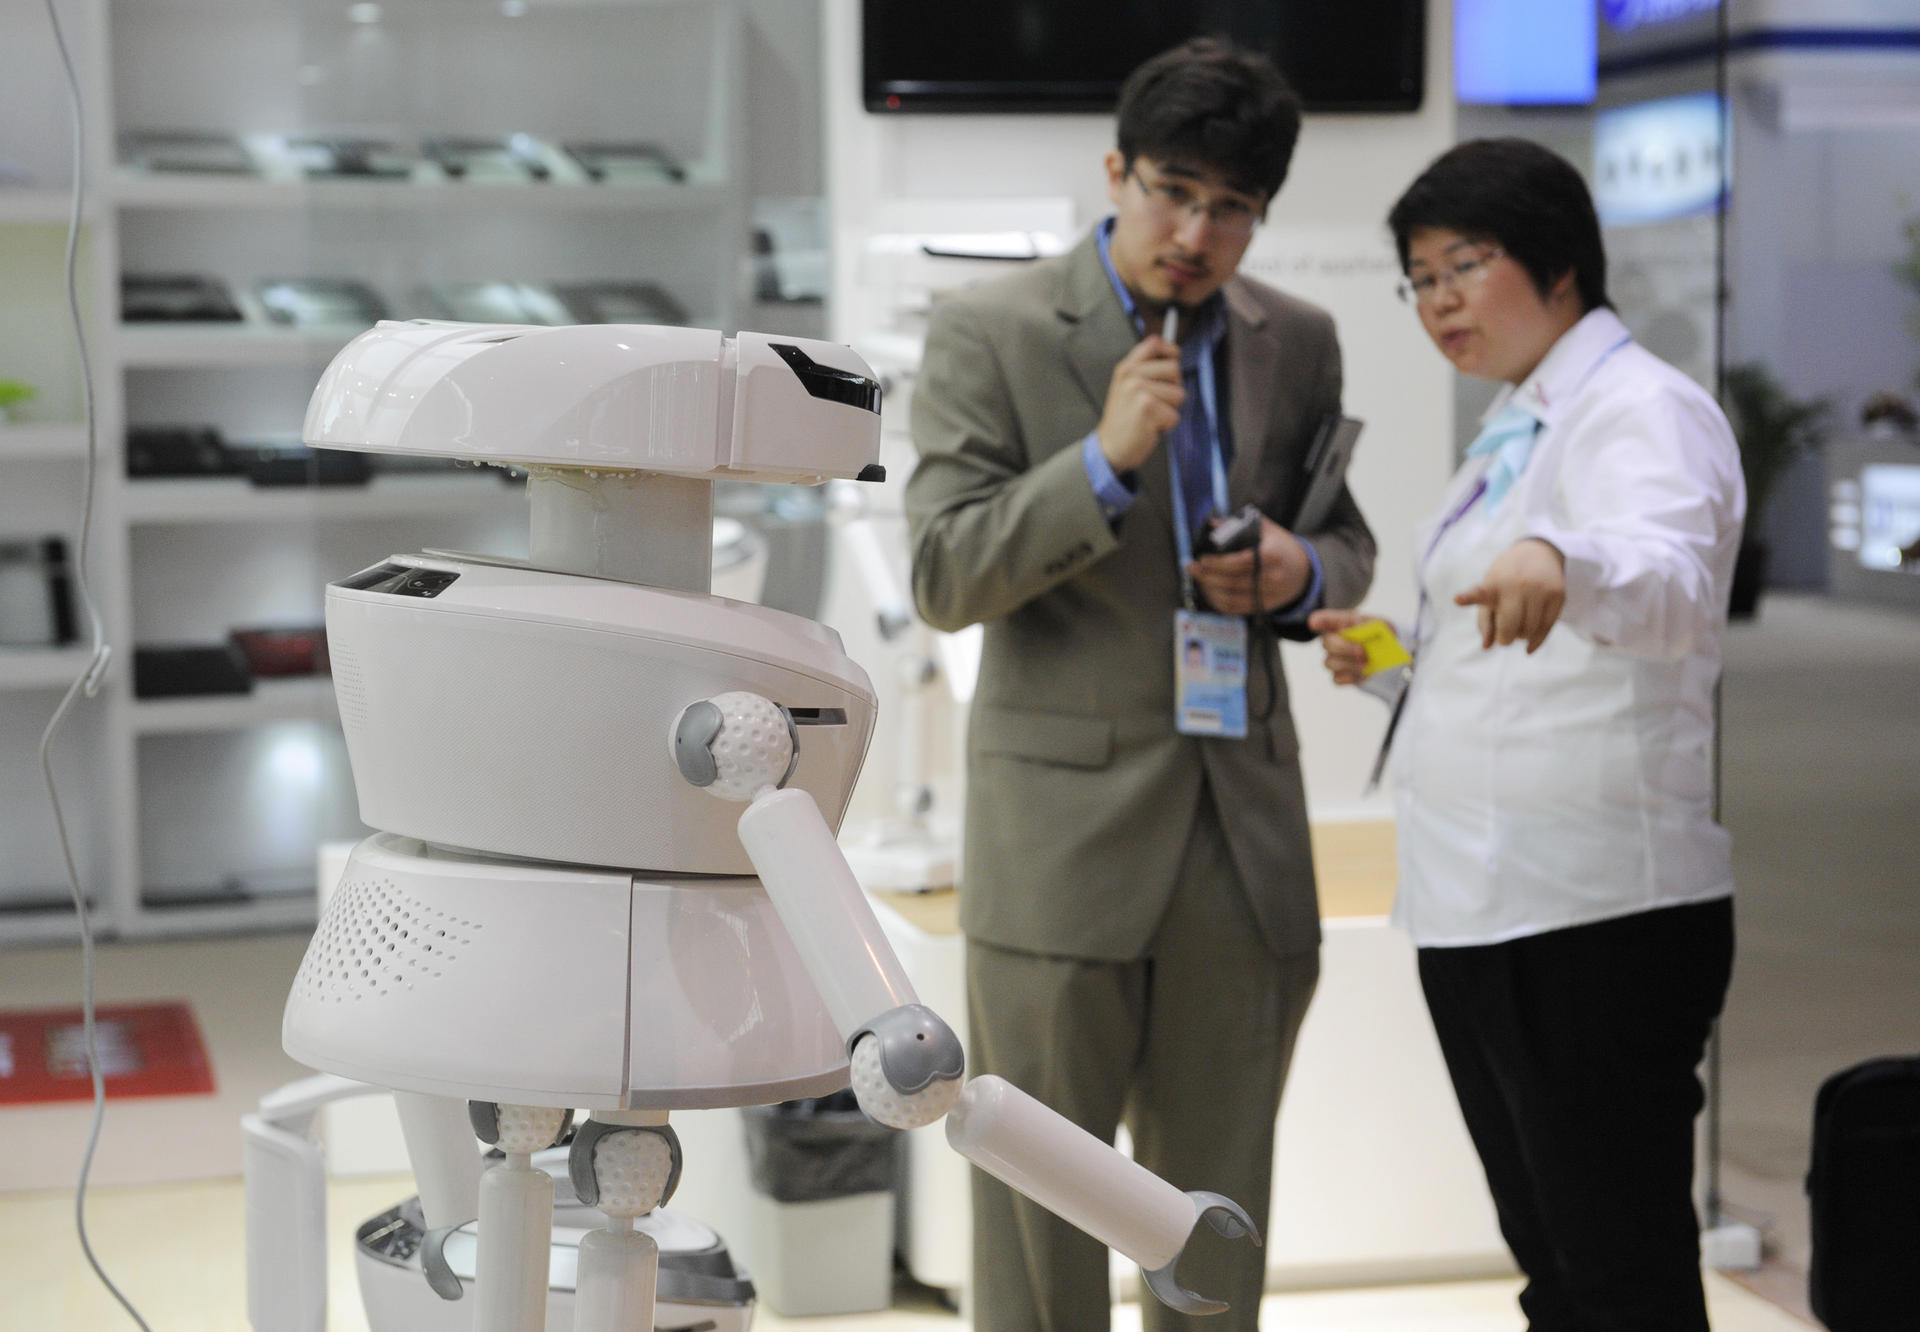 An exhibitor shows off a robot at the Canton Fair, which has seen more interest from overseas buyers due to yuan depreciation. Photo: Xinhua